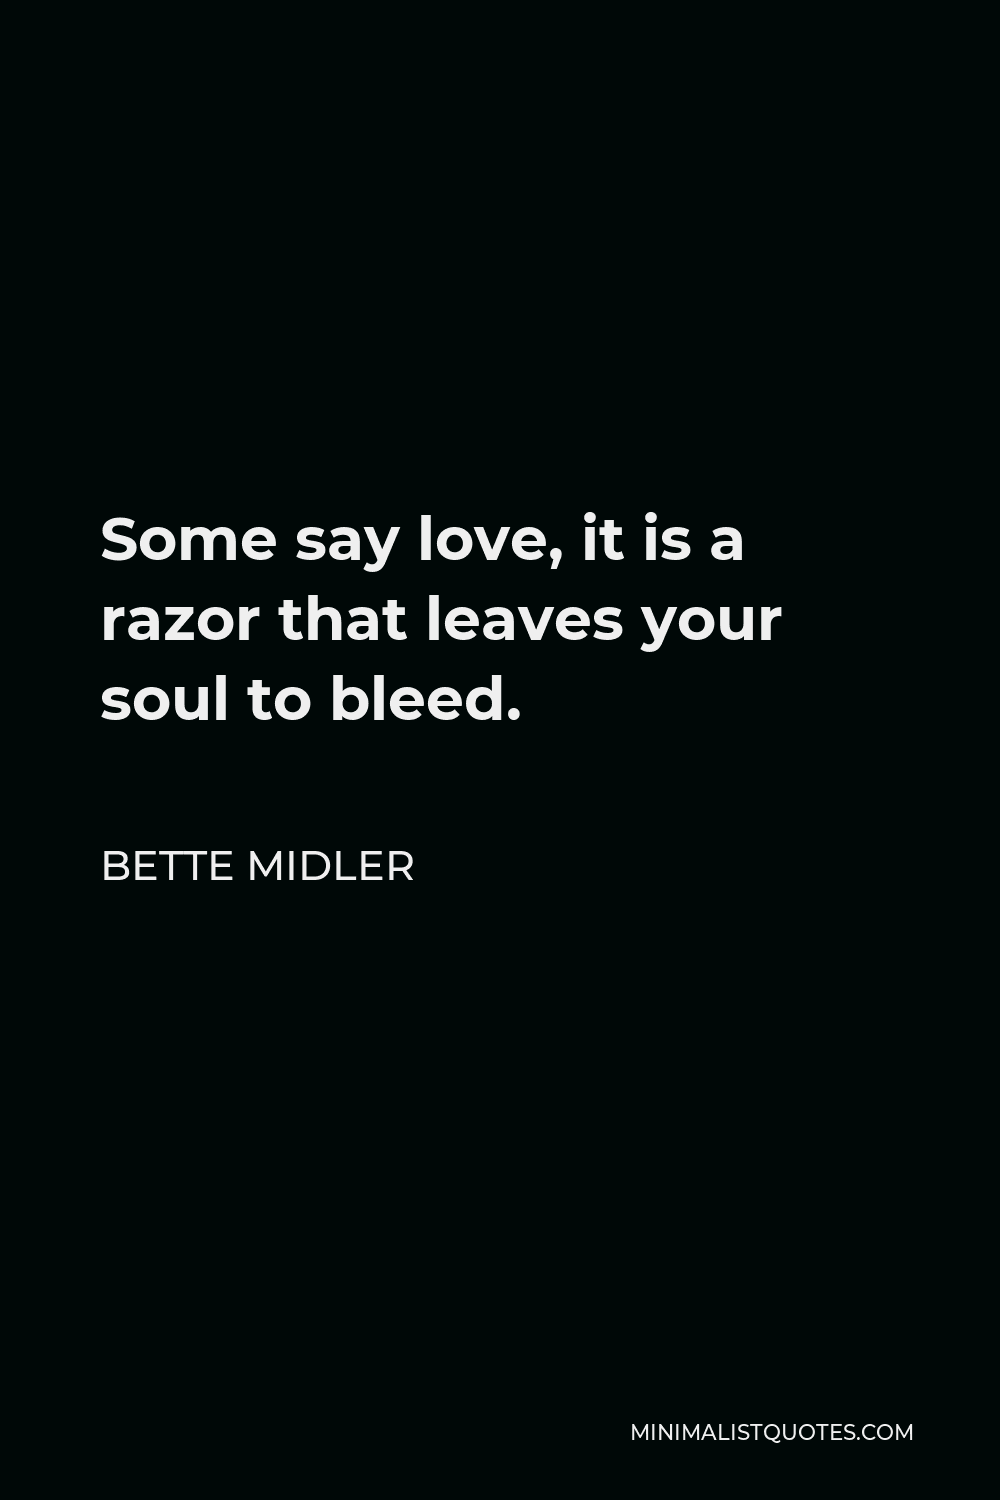 Bette Midler Quote - Some say love, it is a razor that leaves your soul to bleed.